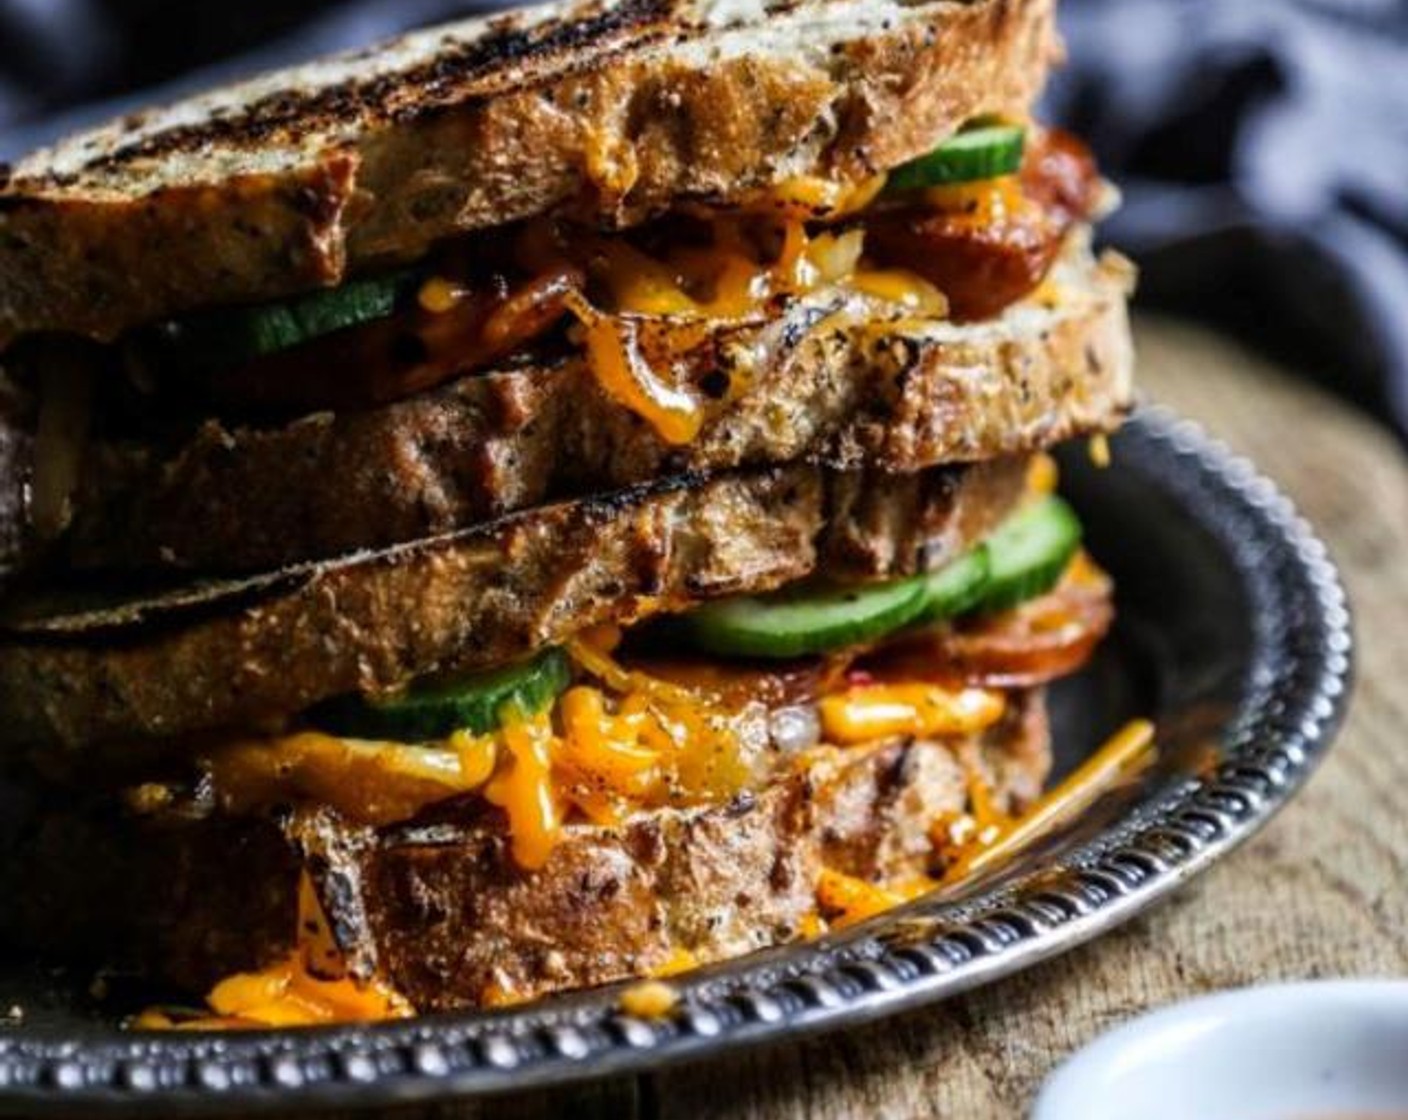 Pimento Grilled Cheese with Andouille